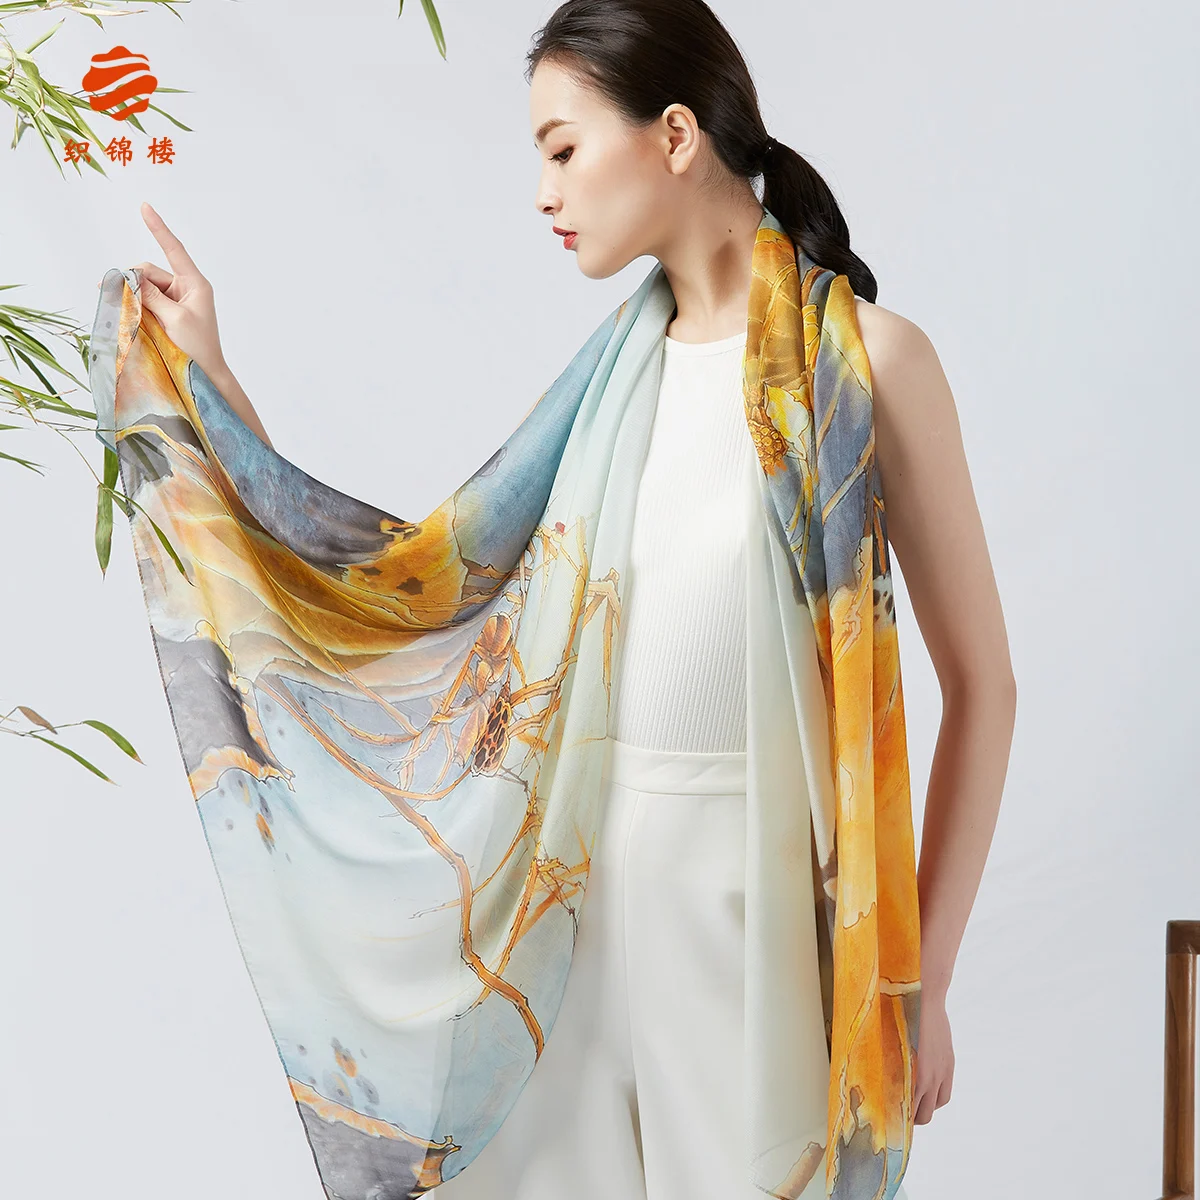 

Zhijinlou Hangzhou Silk Silk Scarf Women's Spring and Autumn Mulberry Silk Scarf Thin and All-Matching Scarf Shawl Outer Match